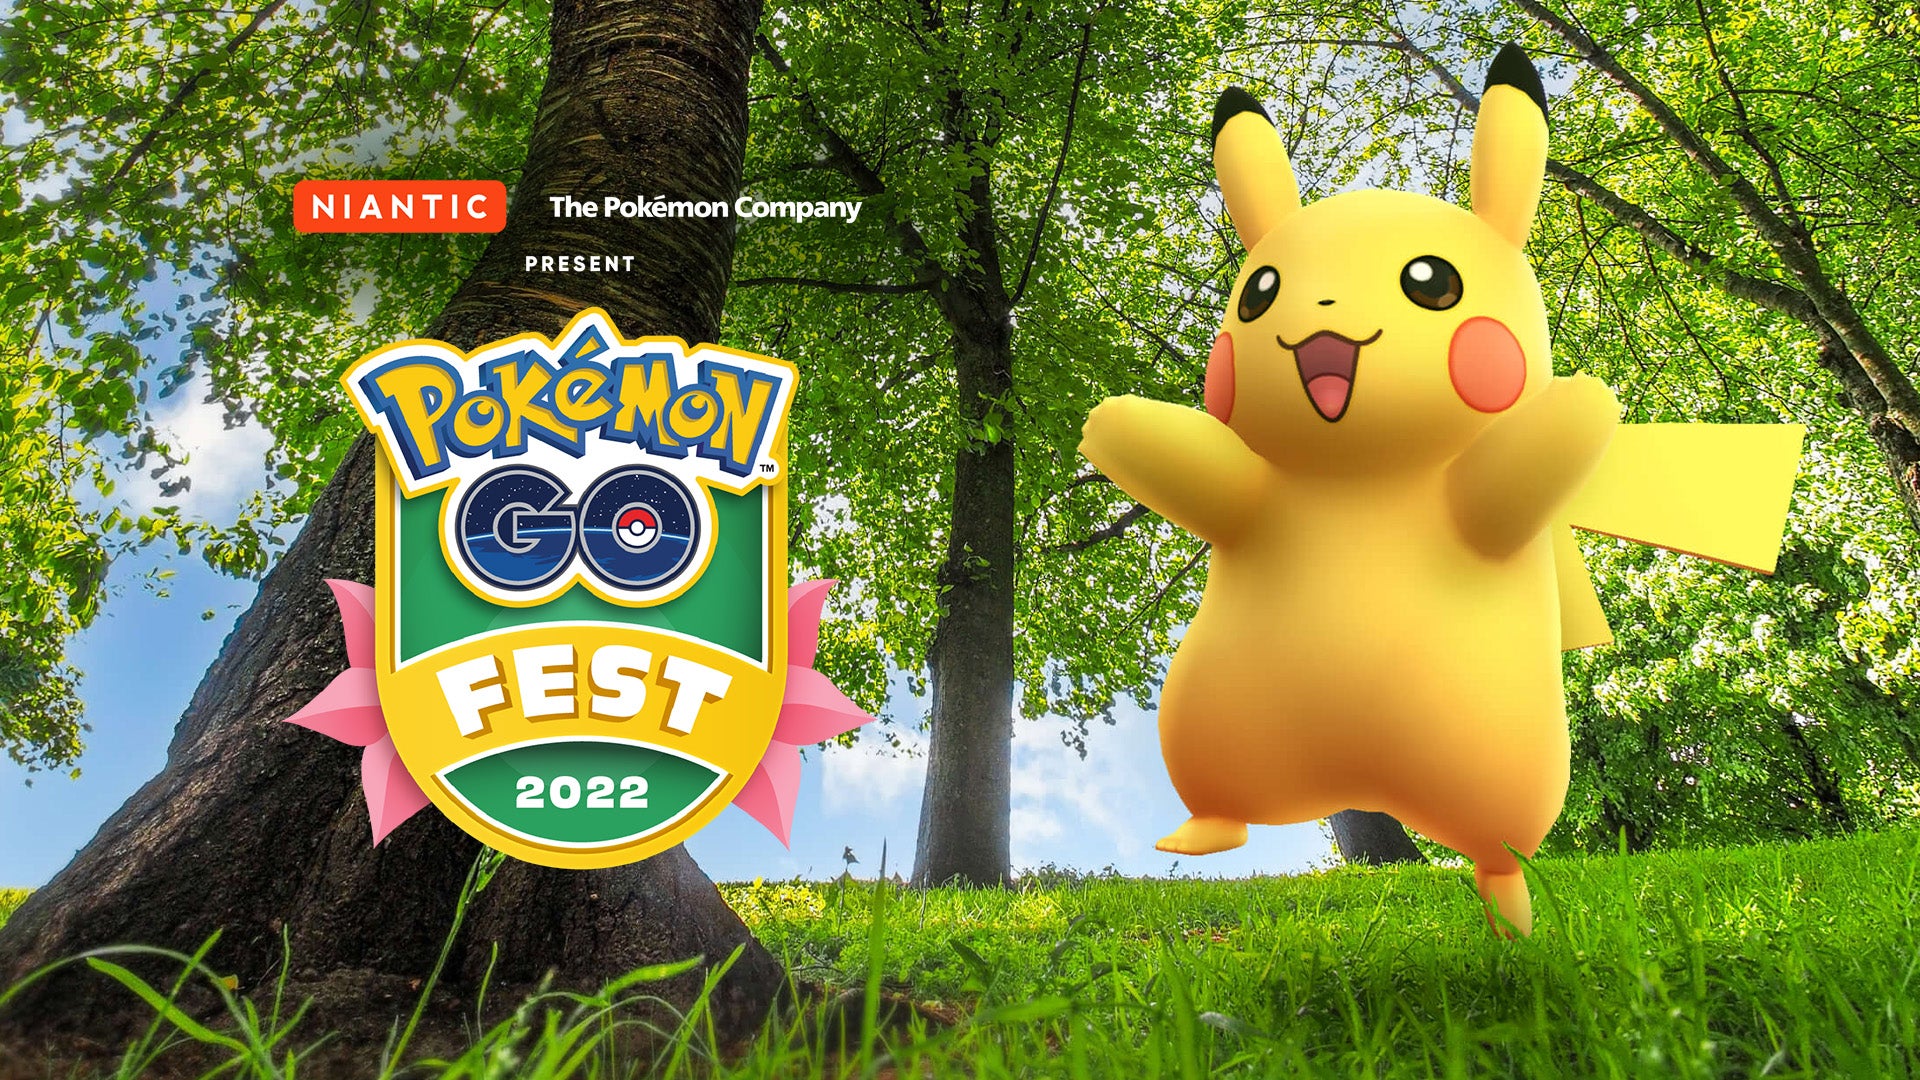 Image for Pokemon Go Fest 2022 will take place both remotely and in-person this year